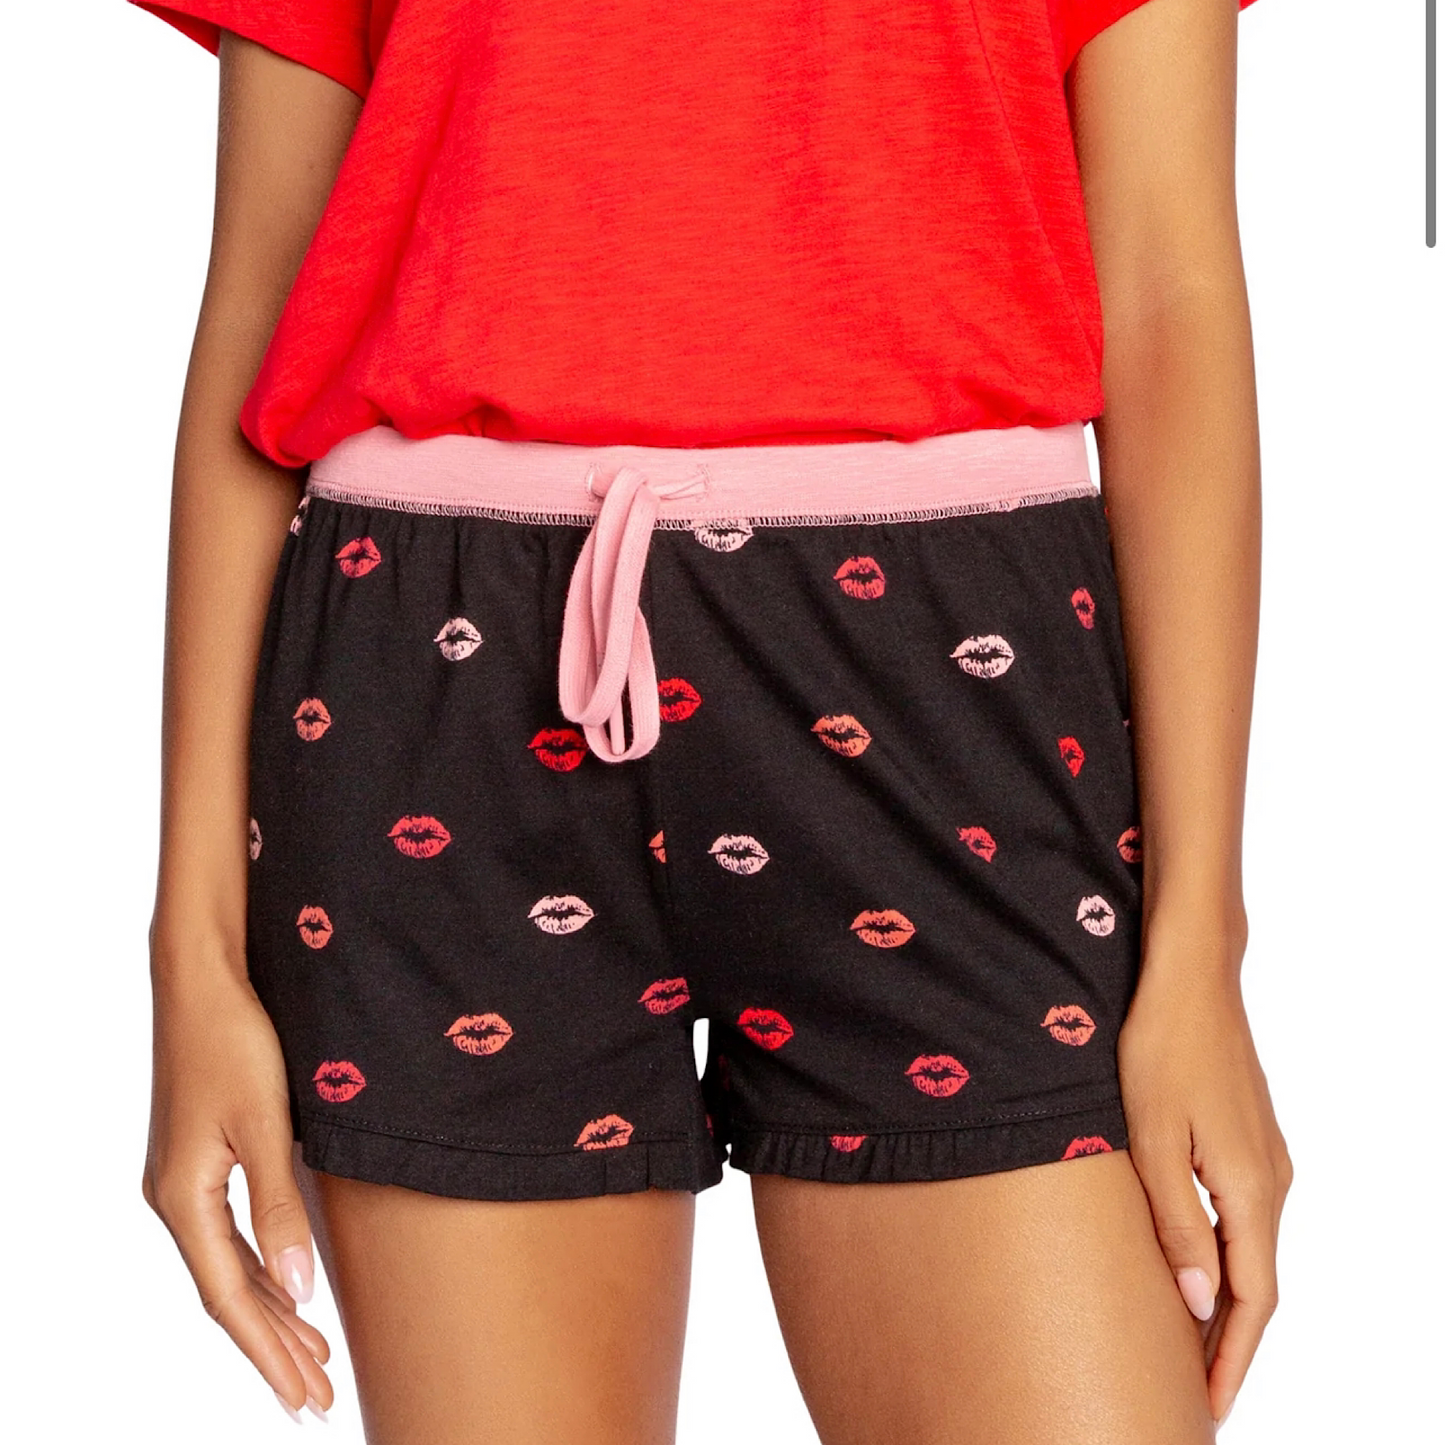 Sleep science 101 - you need a great sleep short! This comfy cotton-modal fits the bill with its breathable, soft fabric with cute lip-print.